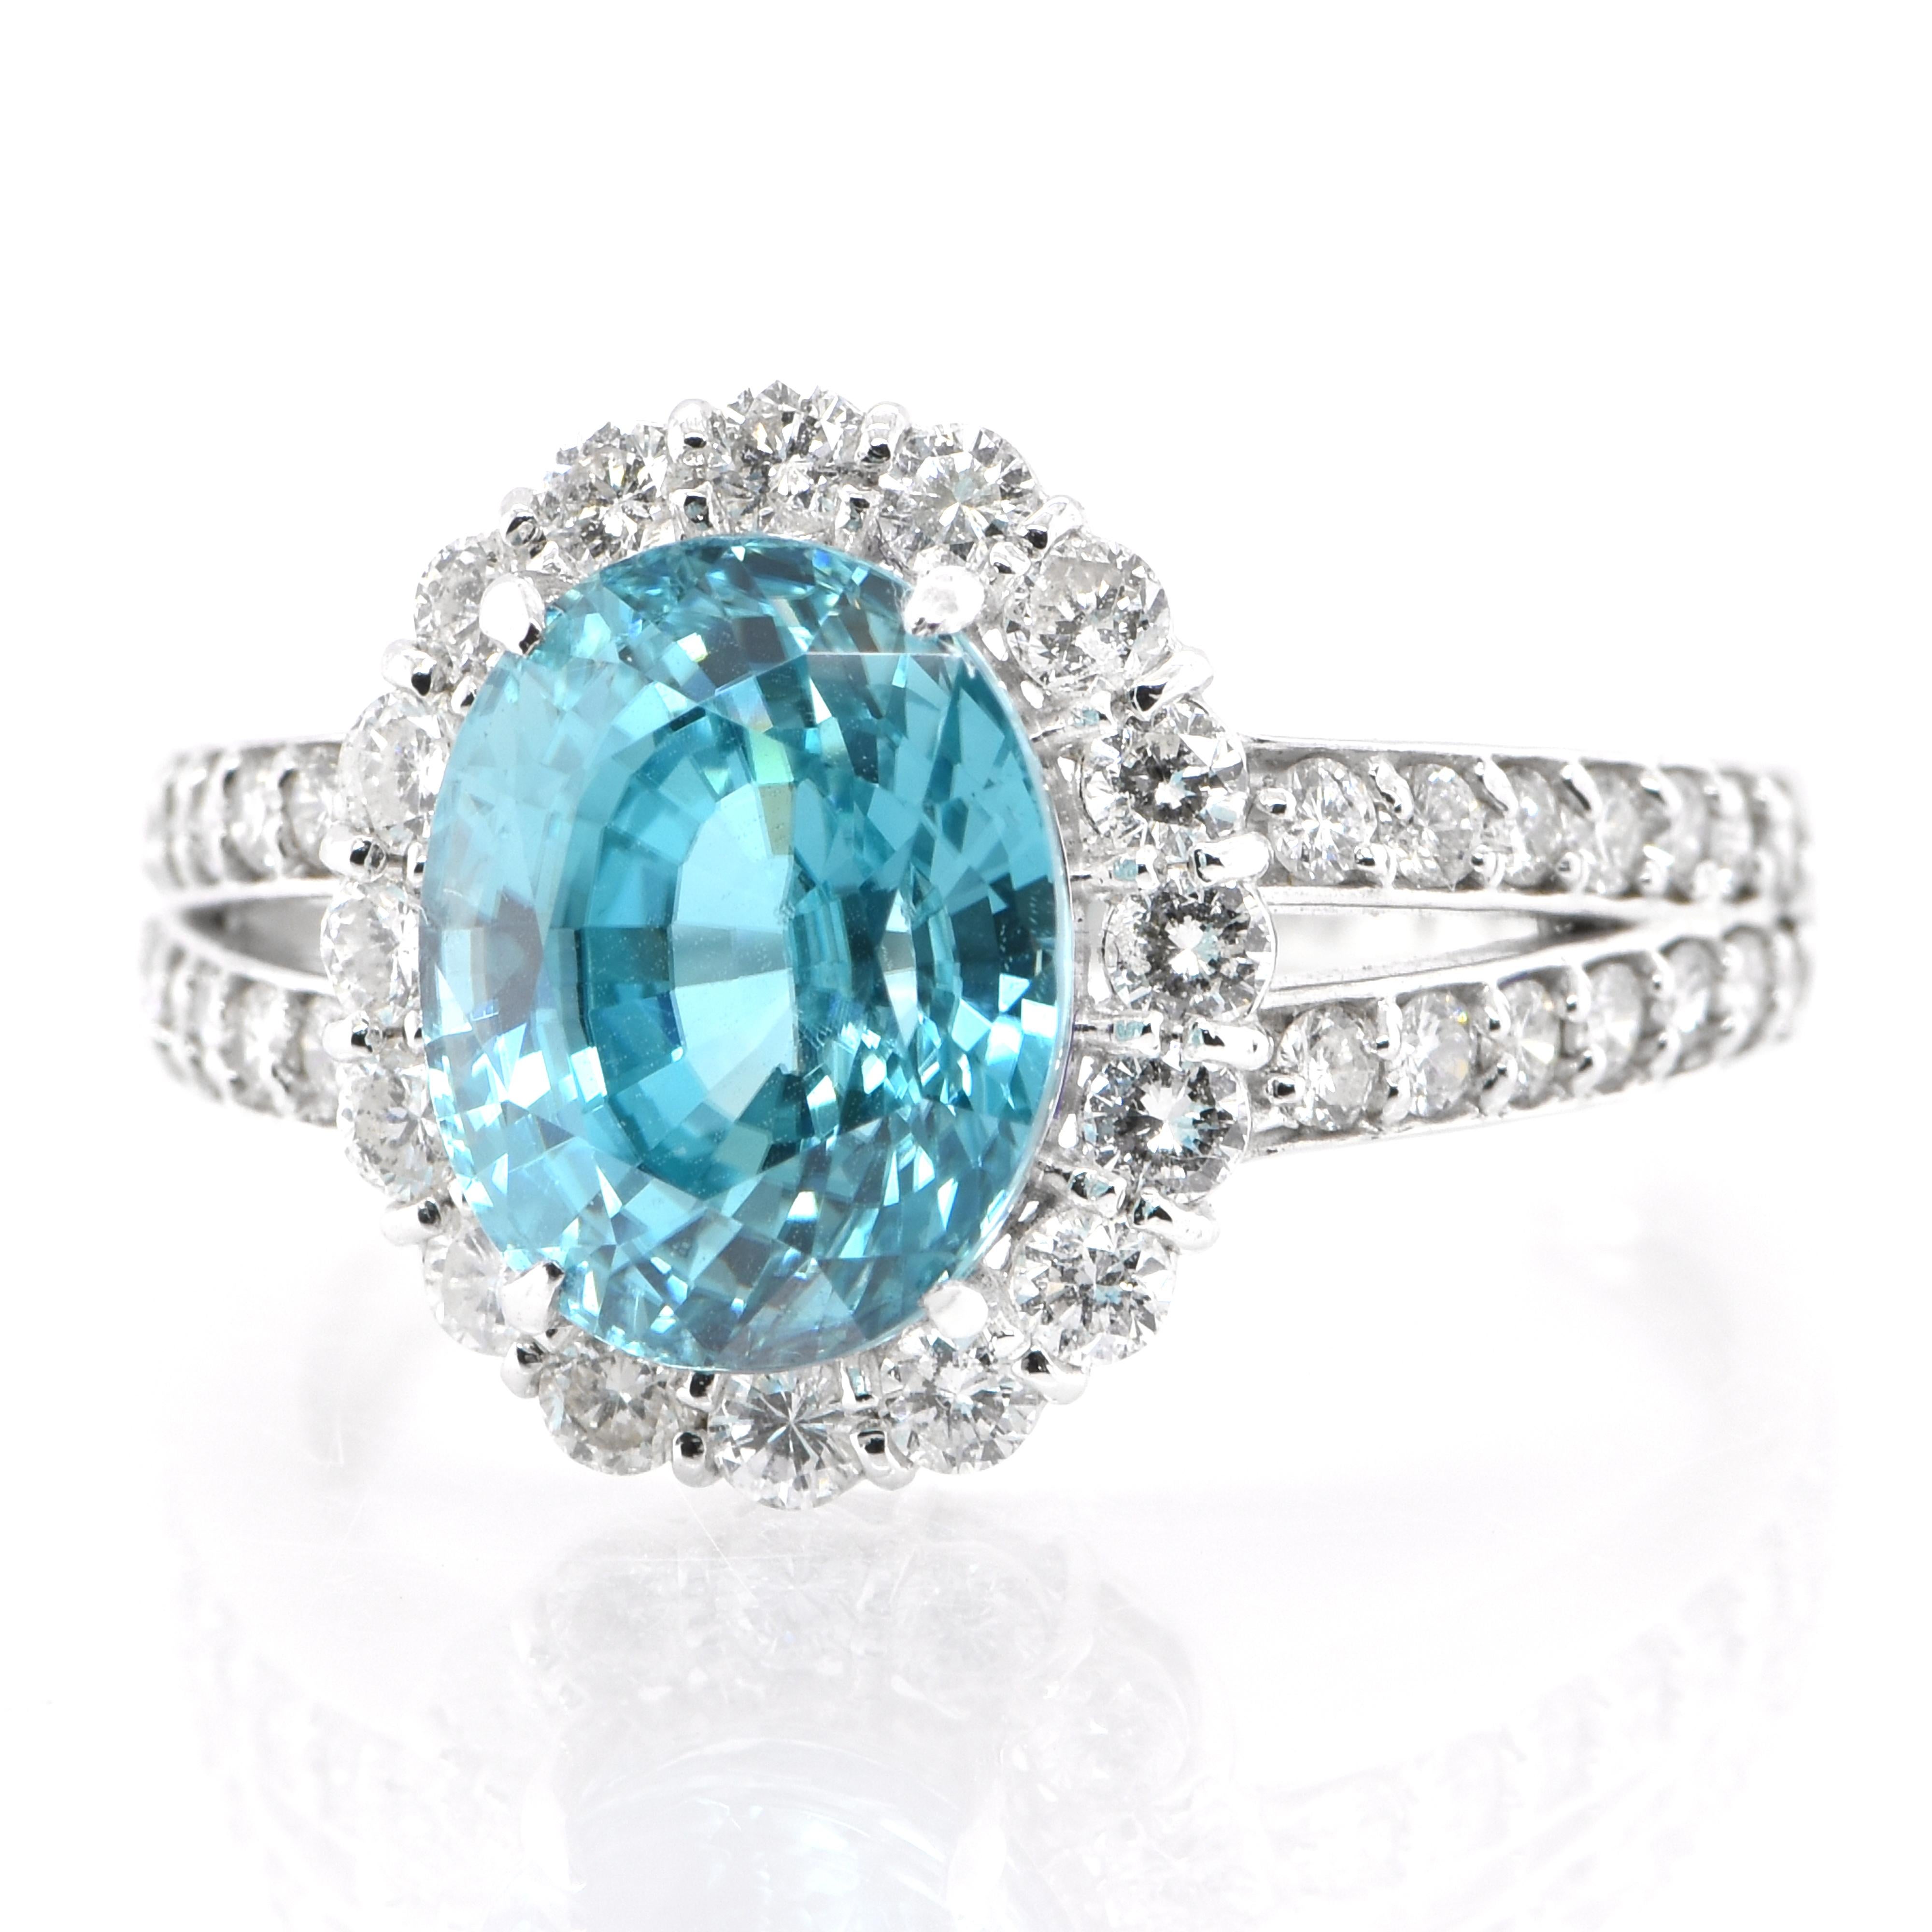 A stunning ring featuring a 4.84 Carat Natural Blue Zircon and 0.74 Carats of Diamond Accents set in Platinum. The ring is made in Japan. Ring size and stamping detailed below. Contact Us for more information.   

Ring Size: 10 (Japan), 5 1/2